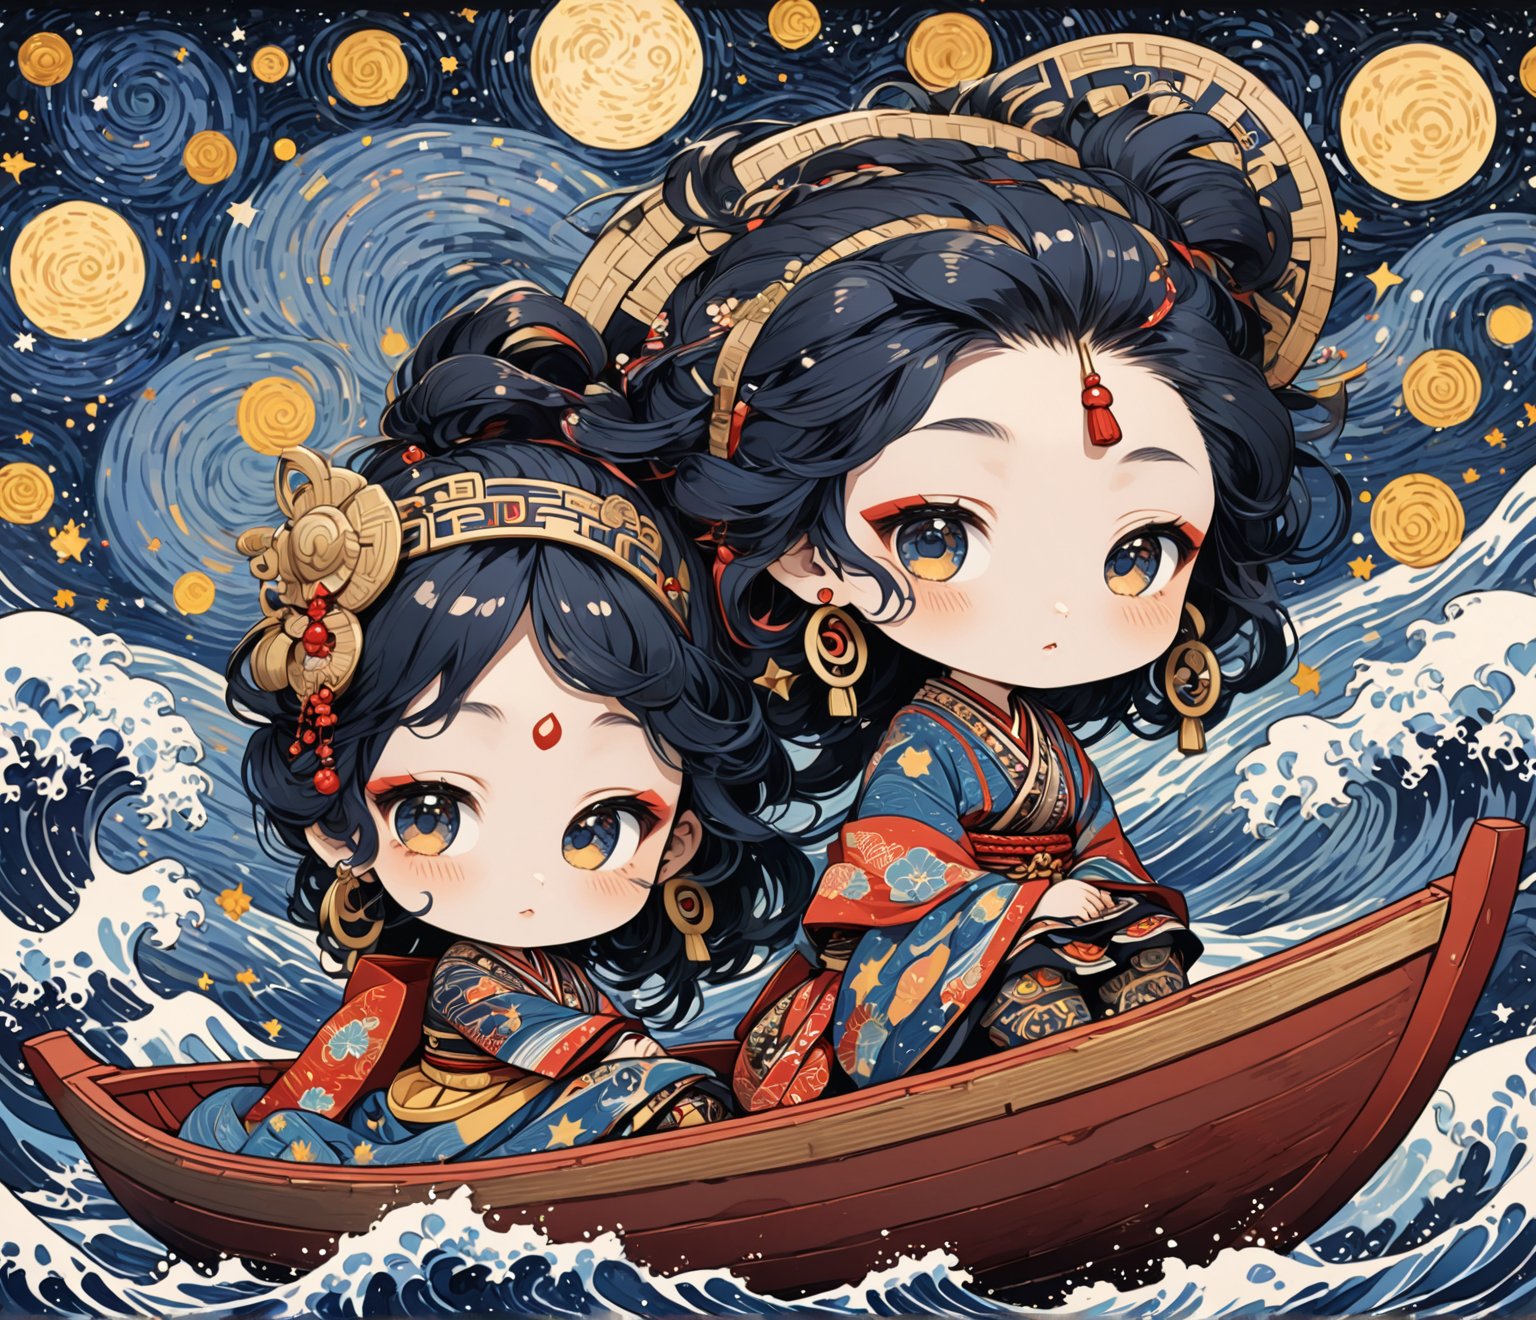 Masterpiece, 4K, ultra detailed, chibi anime style, solo, 1 busty ancient Inca woman sitting on a tiny wooden boat, beautiful flawless face with great makeup, dangling earrings, colorful headpiece, epic starry night, windy, more detail XL, SFW, depth of field, (ukiyoe art style), Ink art,Deformed, 